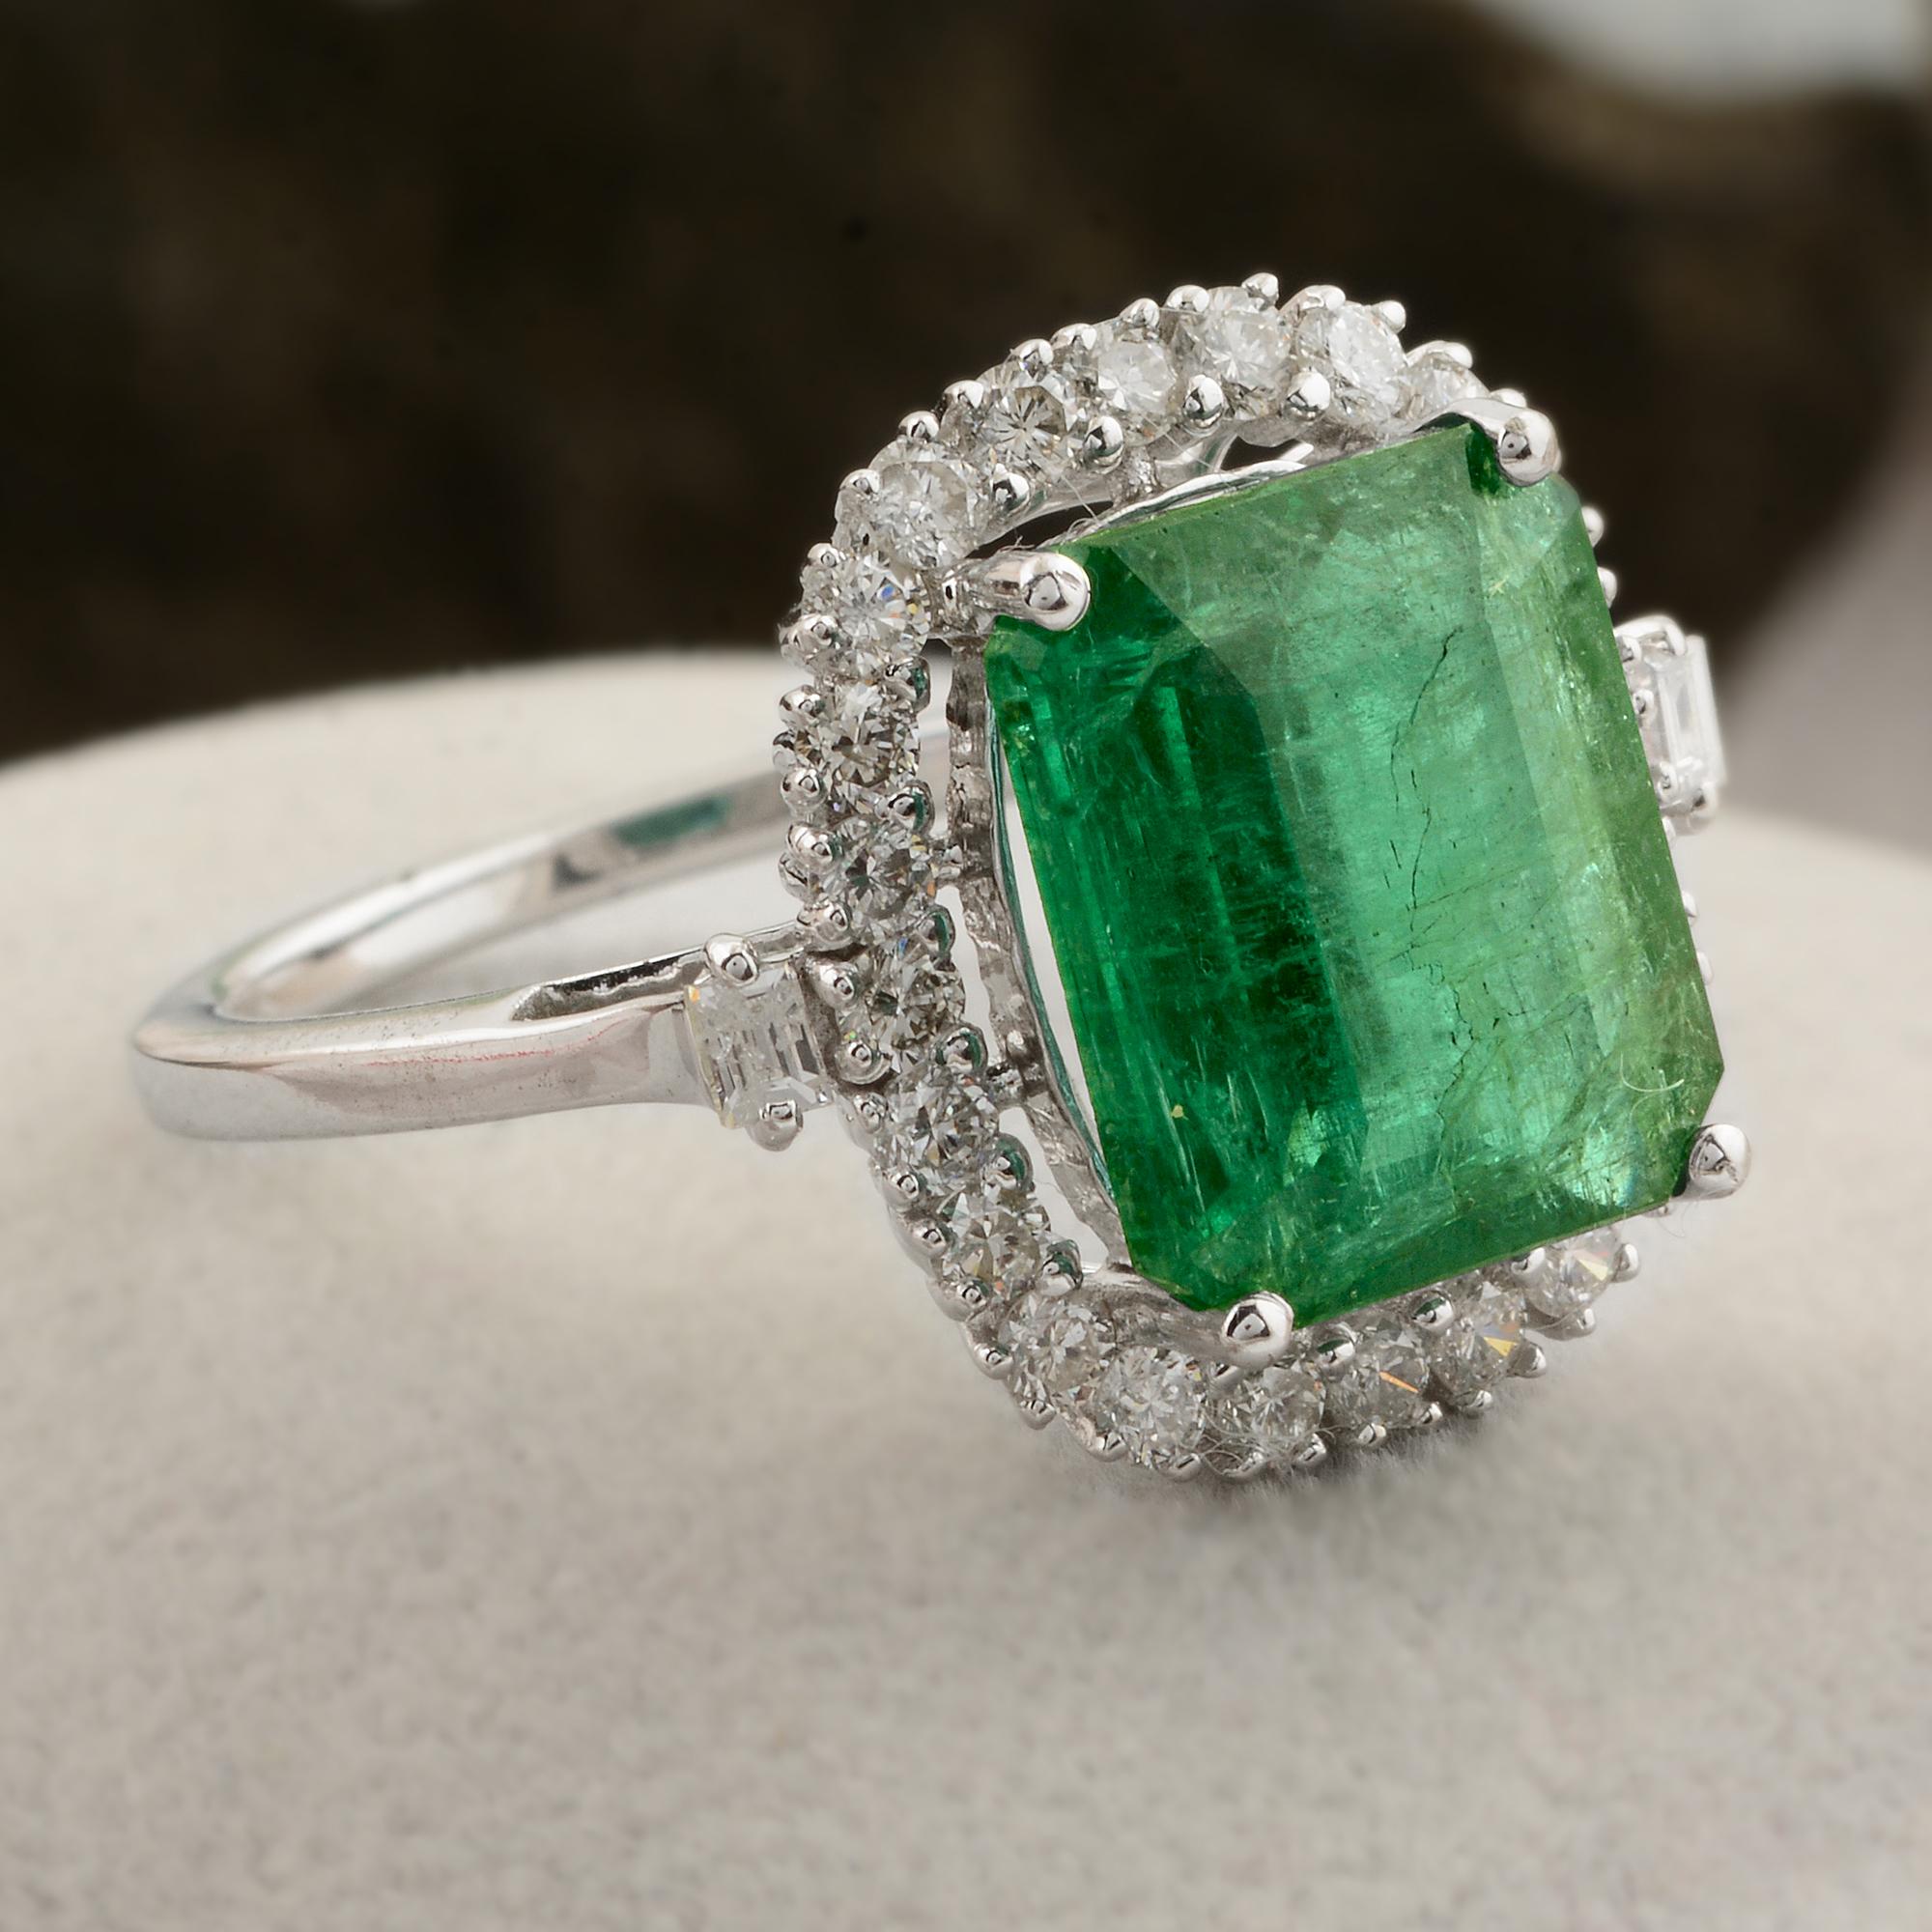 For Sale:  5 Carat Natural Emerald Cocktail Ring 0.75 Carat Diamond Jewelry 10K White Gold 4